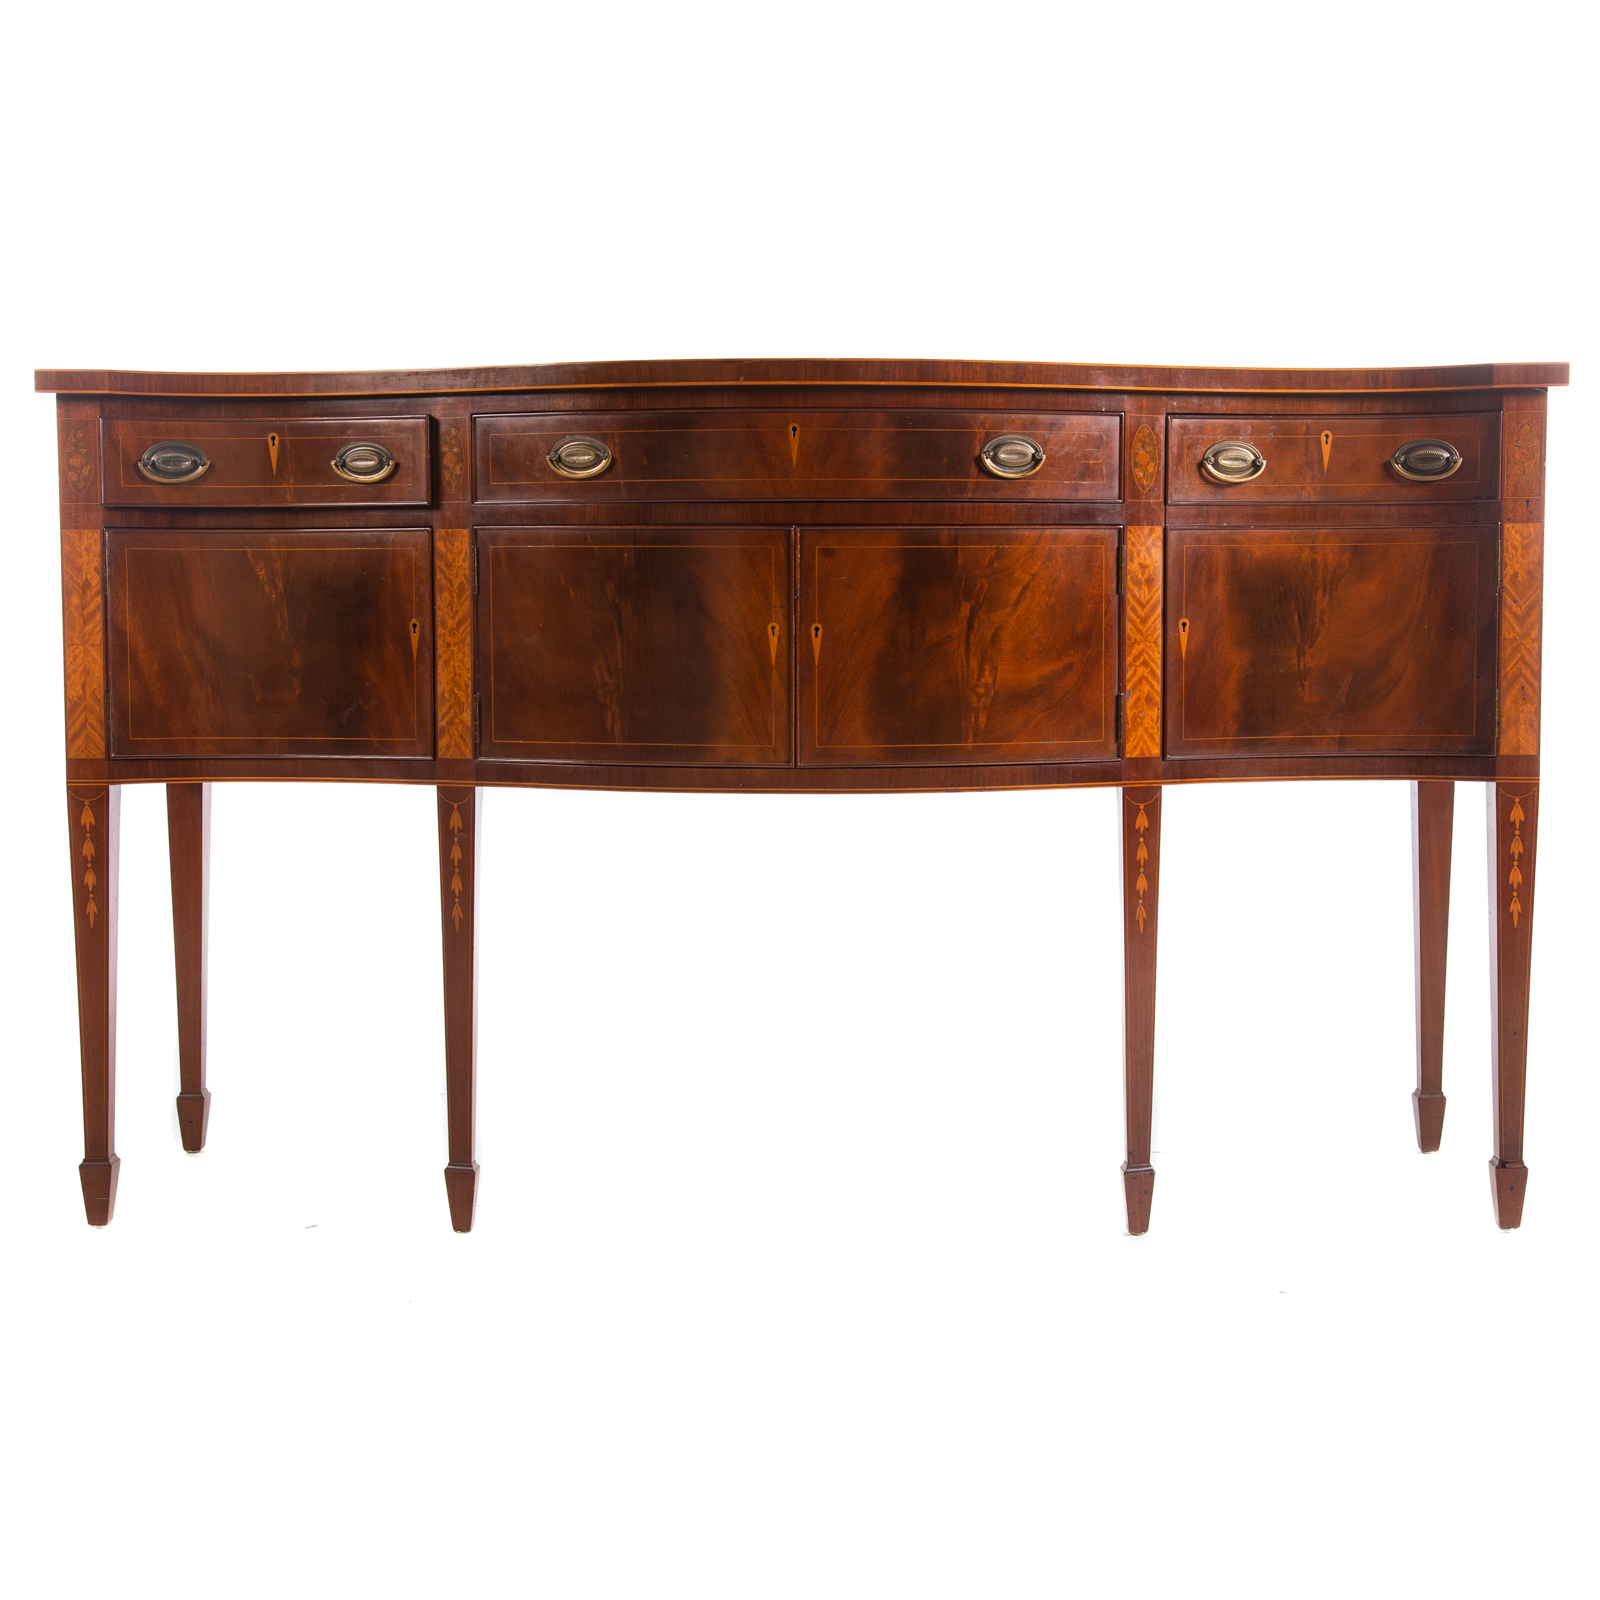 FEDERAL STYLE INLAID SIDEBOARD 369928